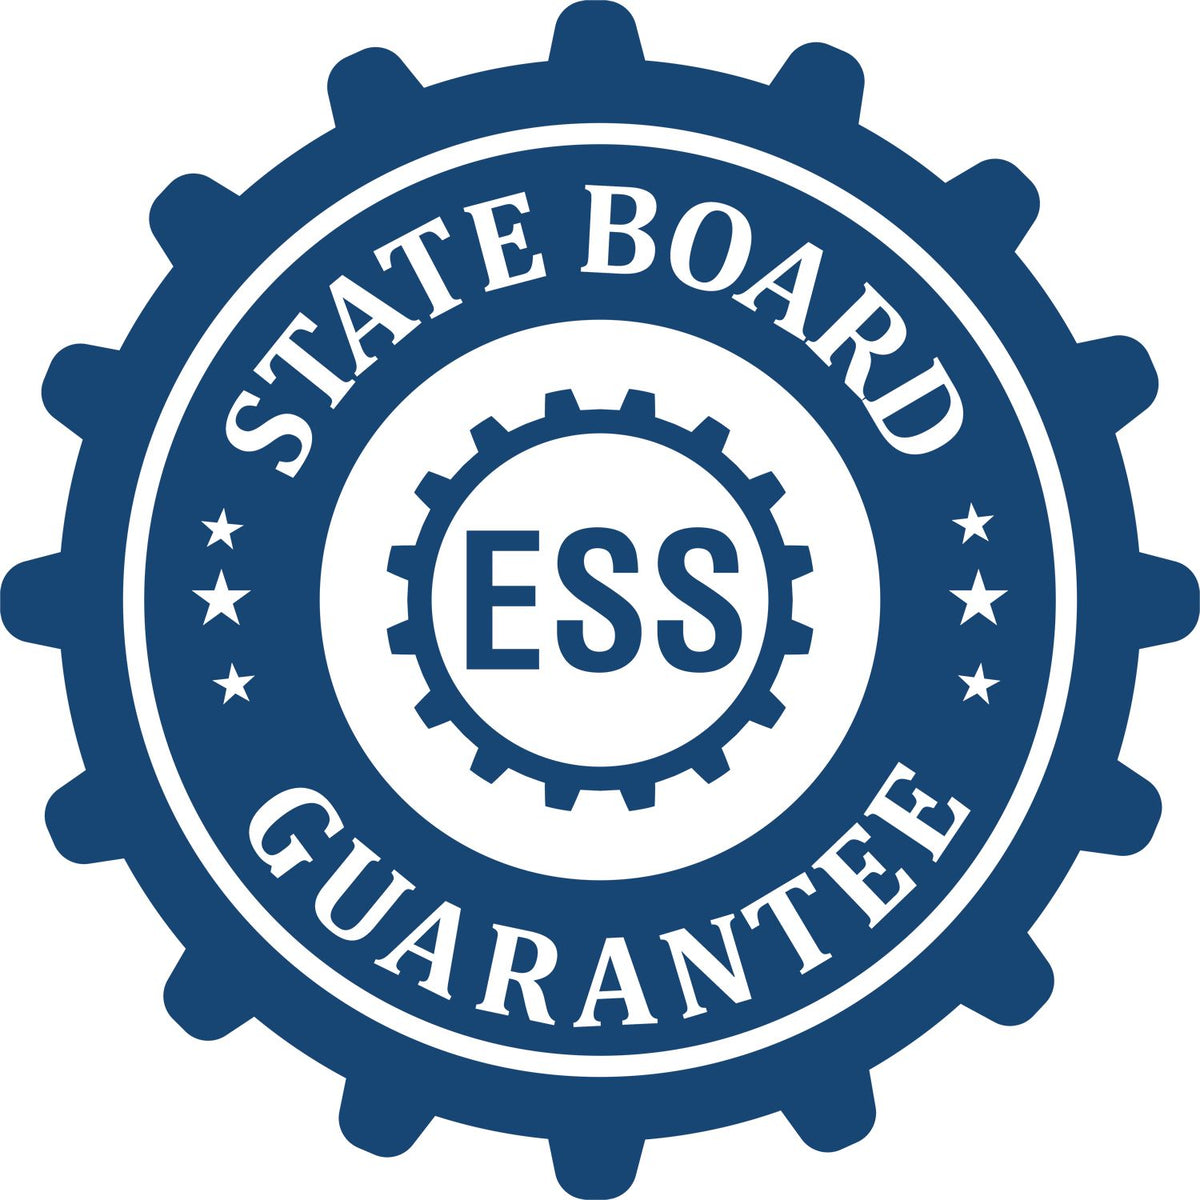 An emblem in a gear shape illustrating a state board guarantee for the Heavy-Duty Colorado Rectangular Notary Stamp product.